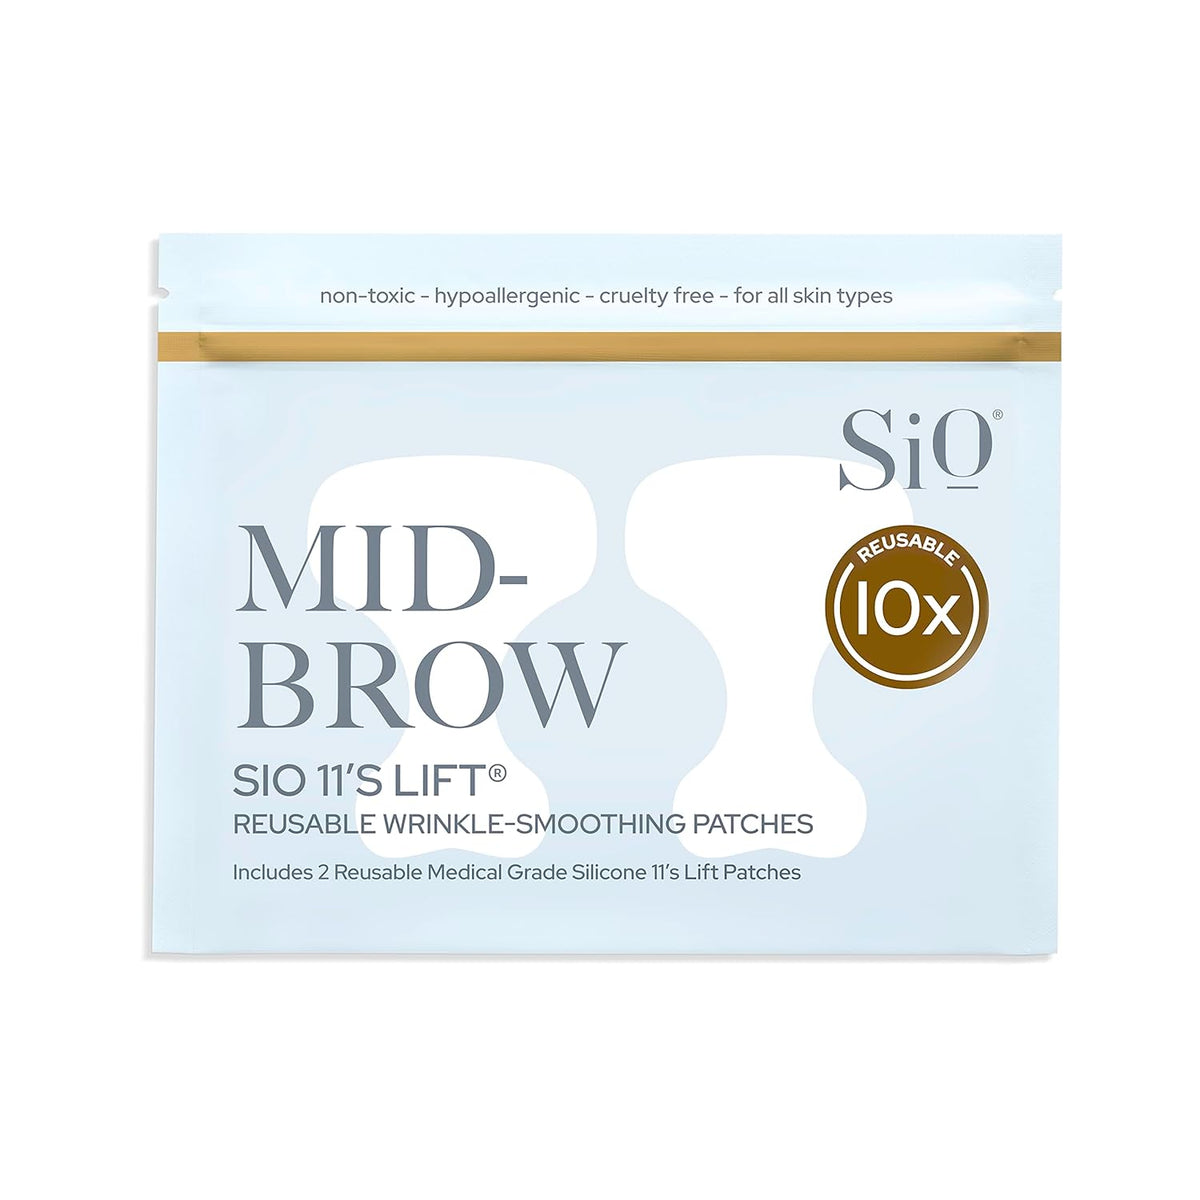 Midbrow Sio 11's Lift Reusable Wrinkle Smoothing Patches